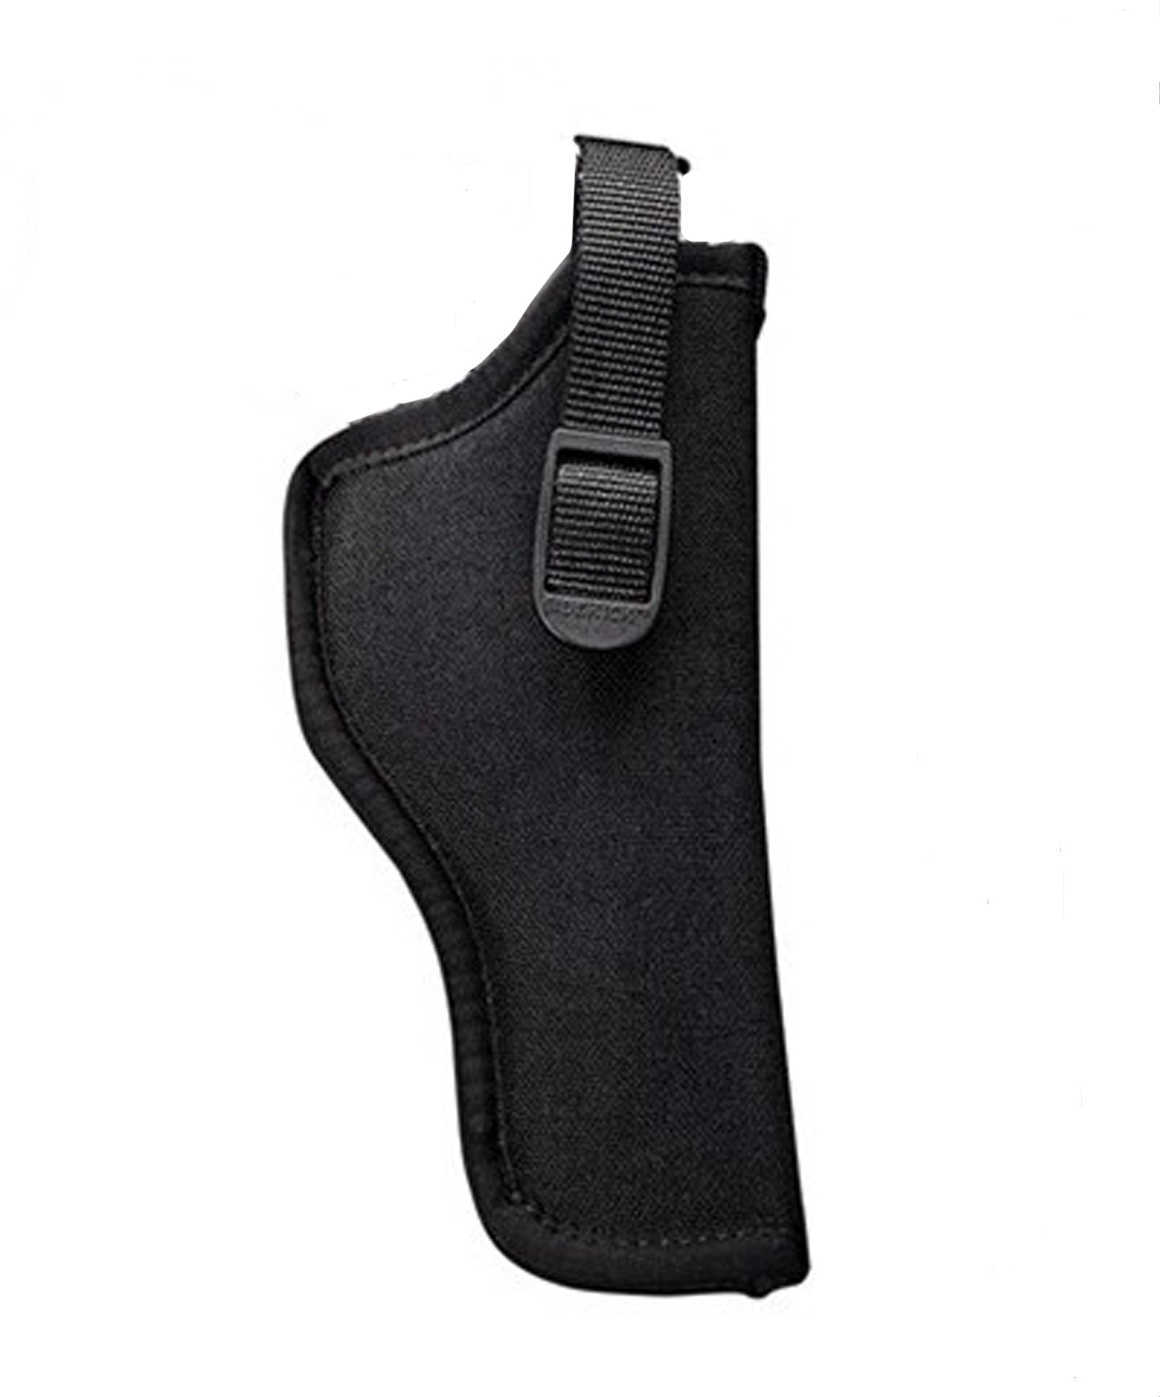 Uncle Mike's Hip Holster Size 1 Fits Medium Auto With 4" Barrel Right Hand Black 8101-1